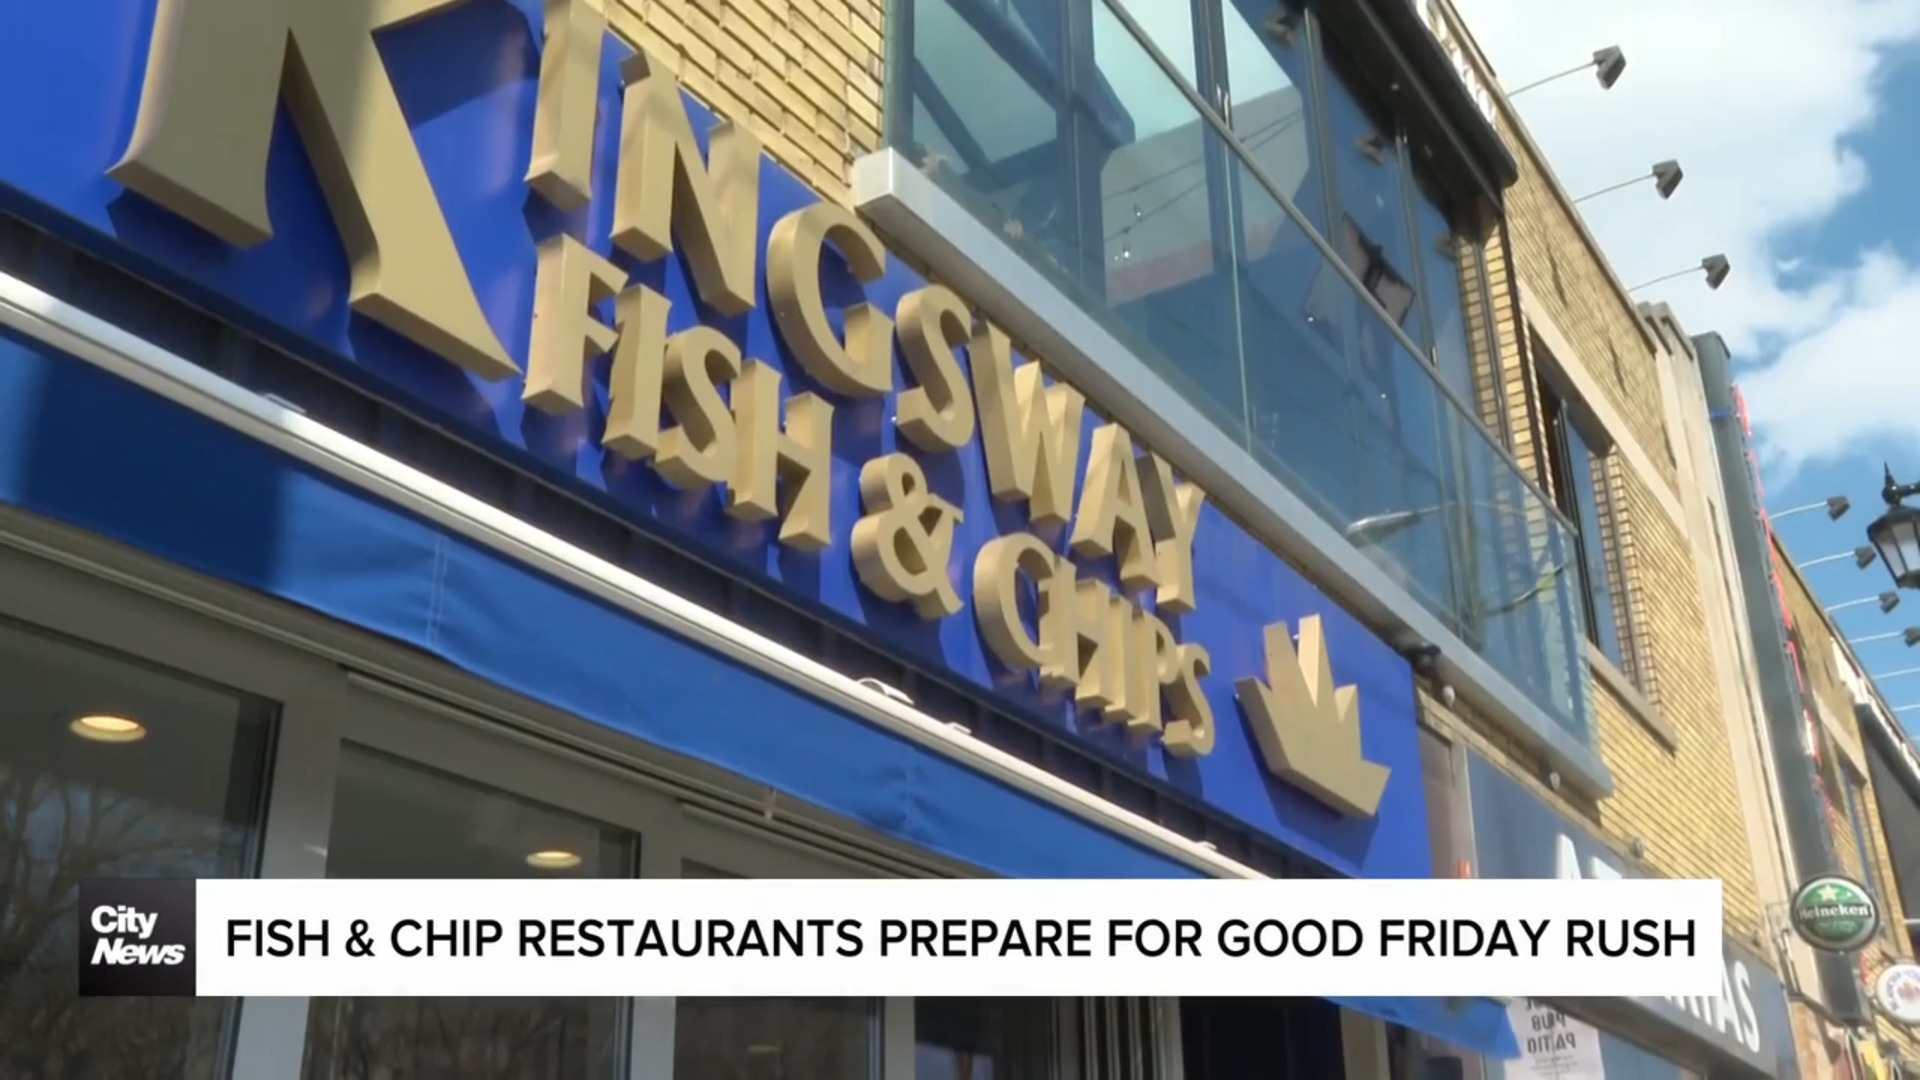 Fish and chip restaurants prepare for Good Friday rush